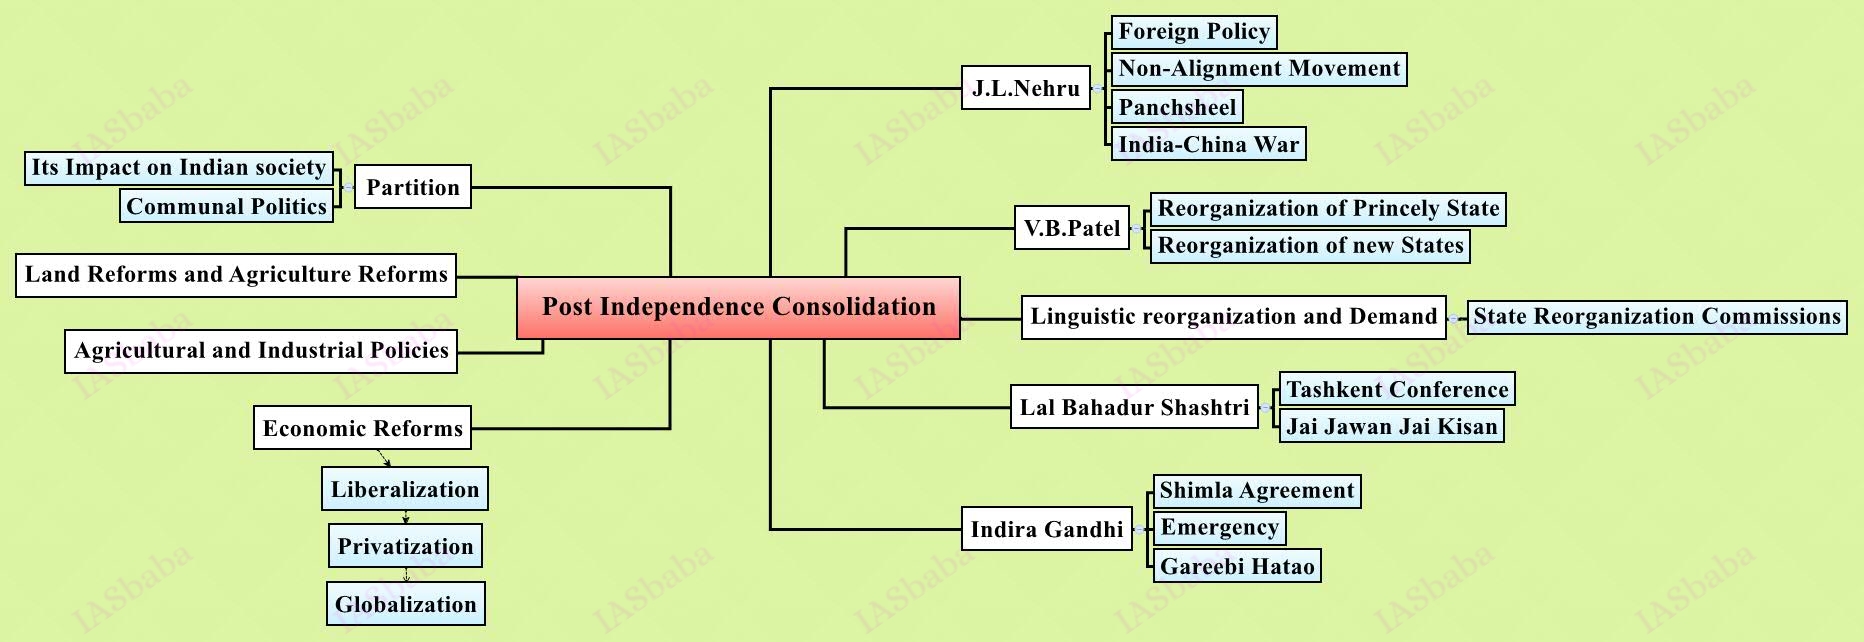 Post-Independence-Consolidation